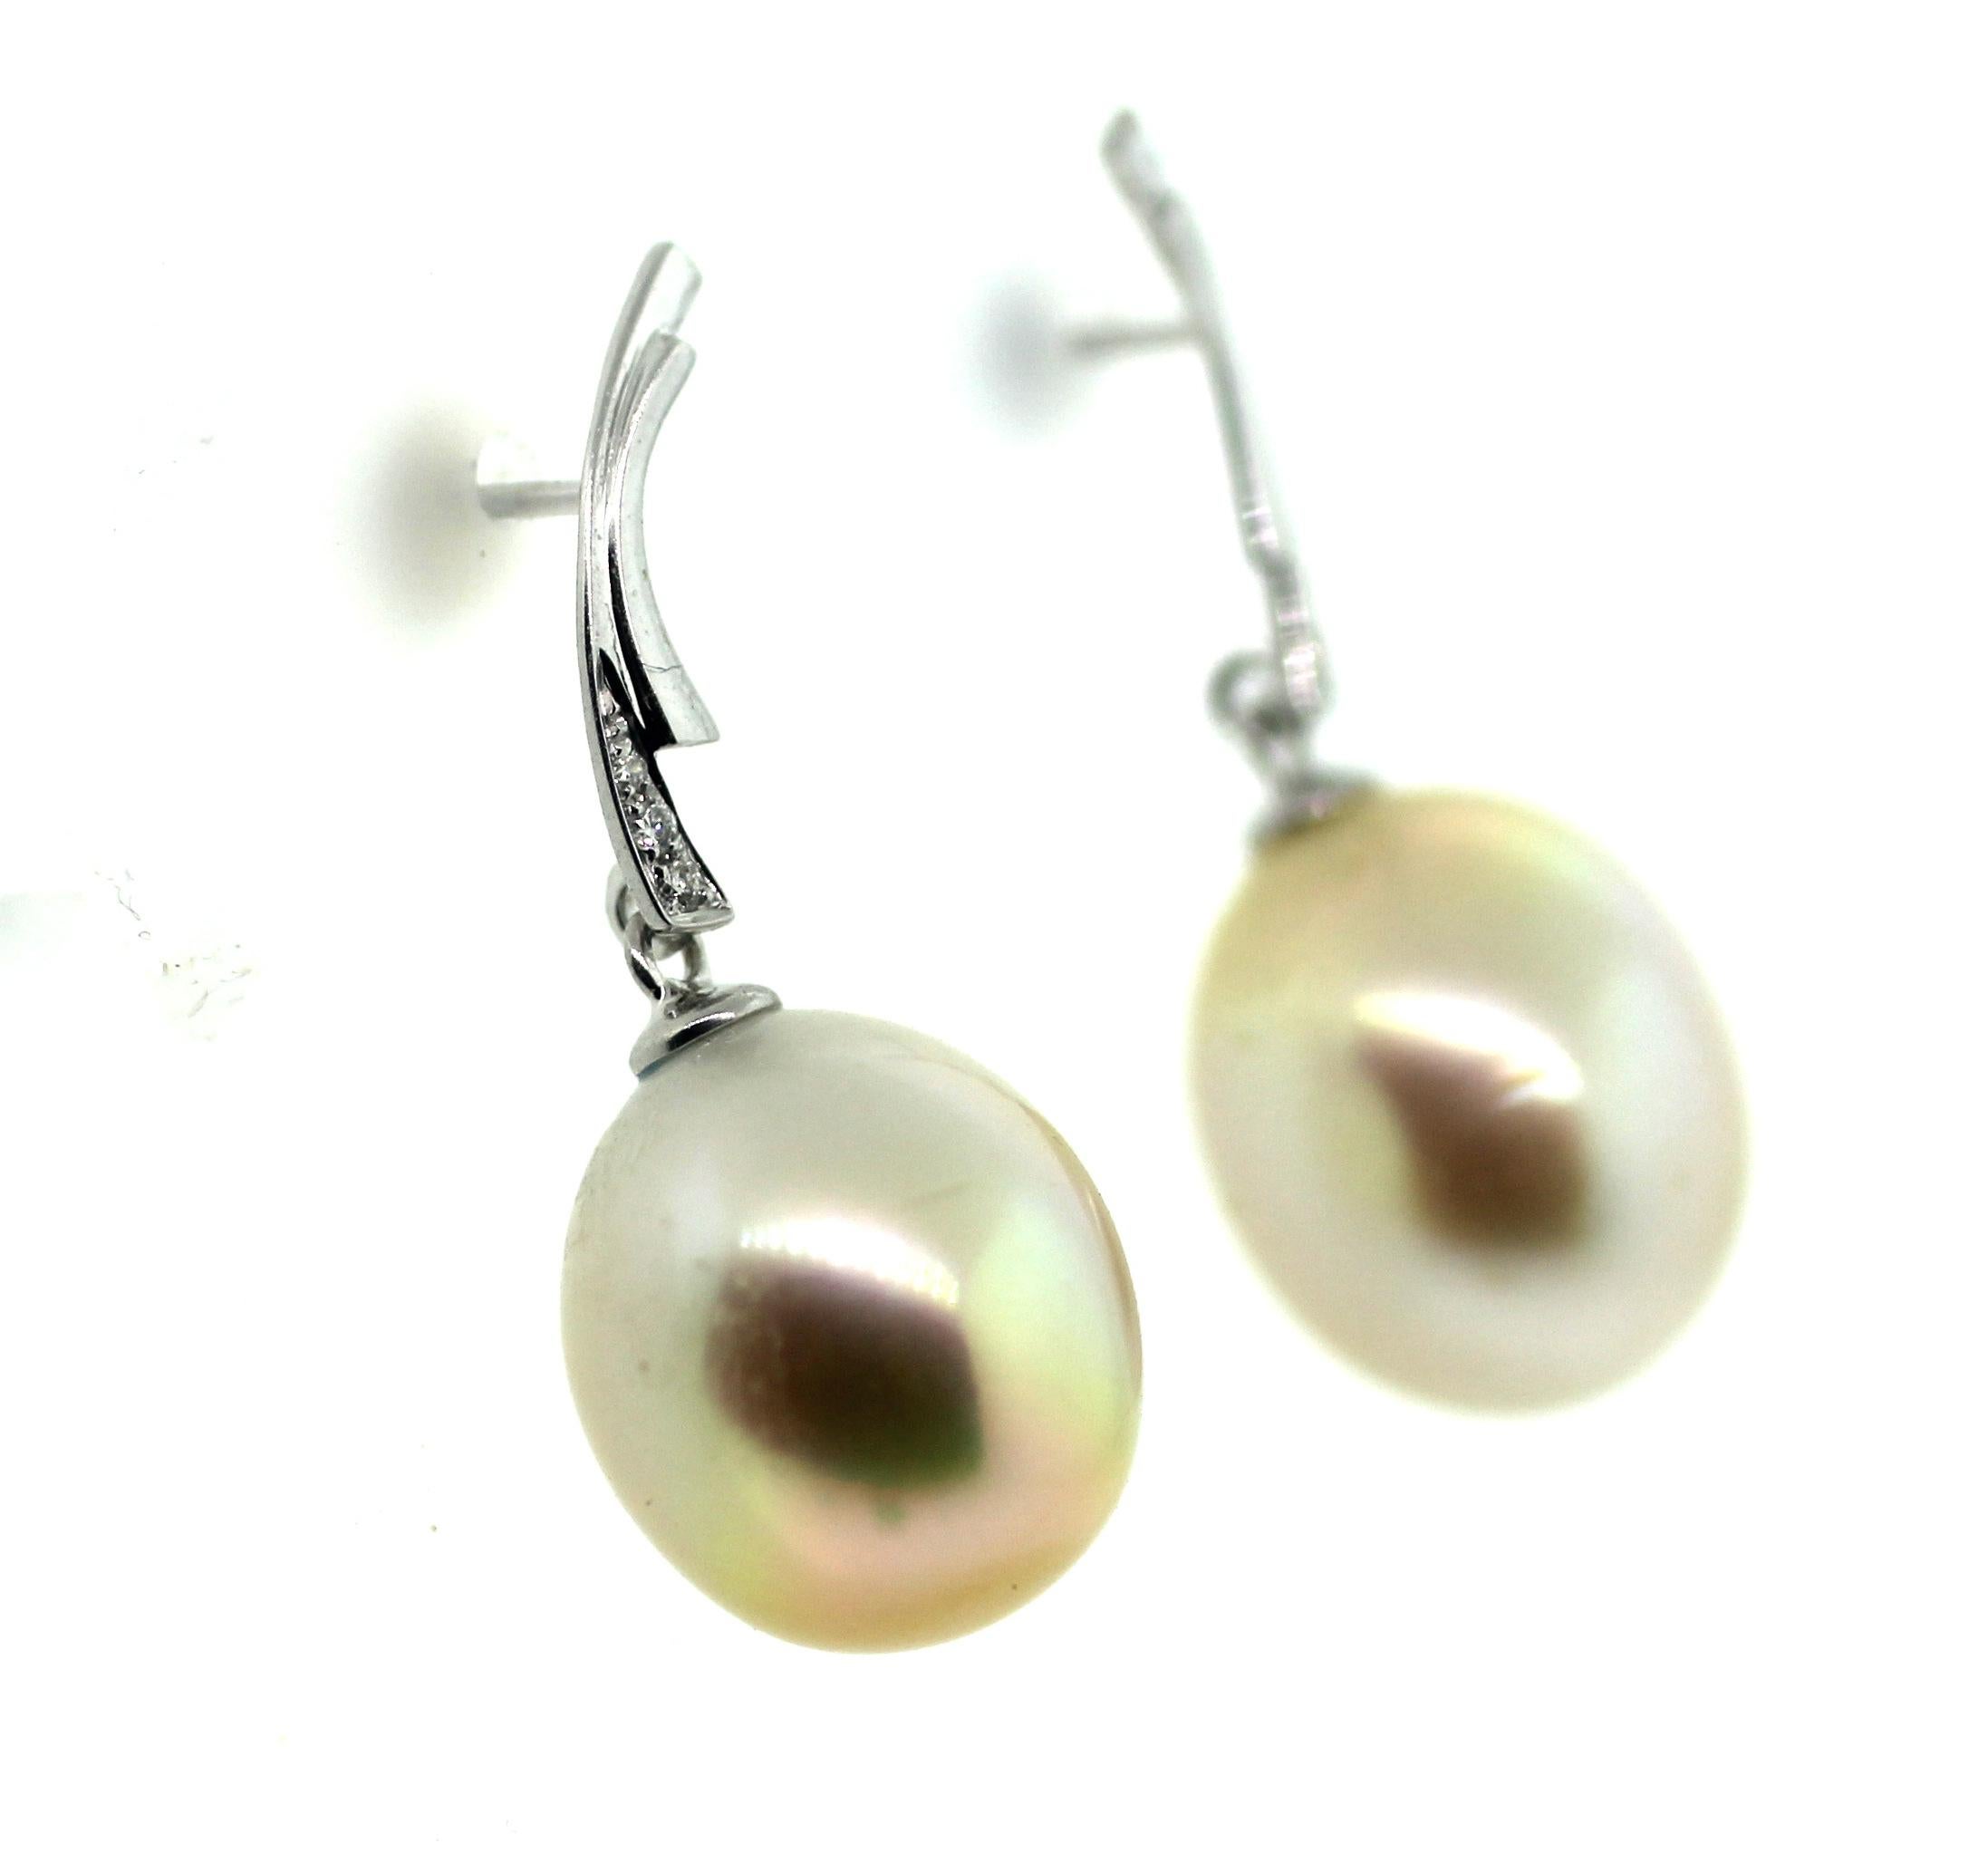 Hakimoto By Jewel Of Ocean
18K White Gold and Diamond 
South Sea Cultured Pearl Earrings.
Total item weight 7.4 grams
Featuring Round Brilliant Diamonds
11.5-13mm Drop Cultured Pearls
18K White Gold High Polish
Orient: Very Good
Luster: Very